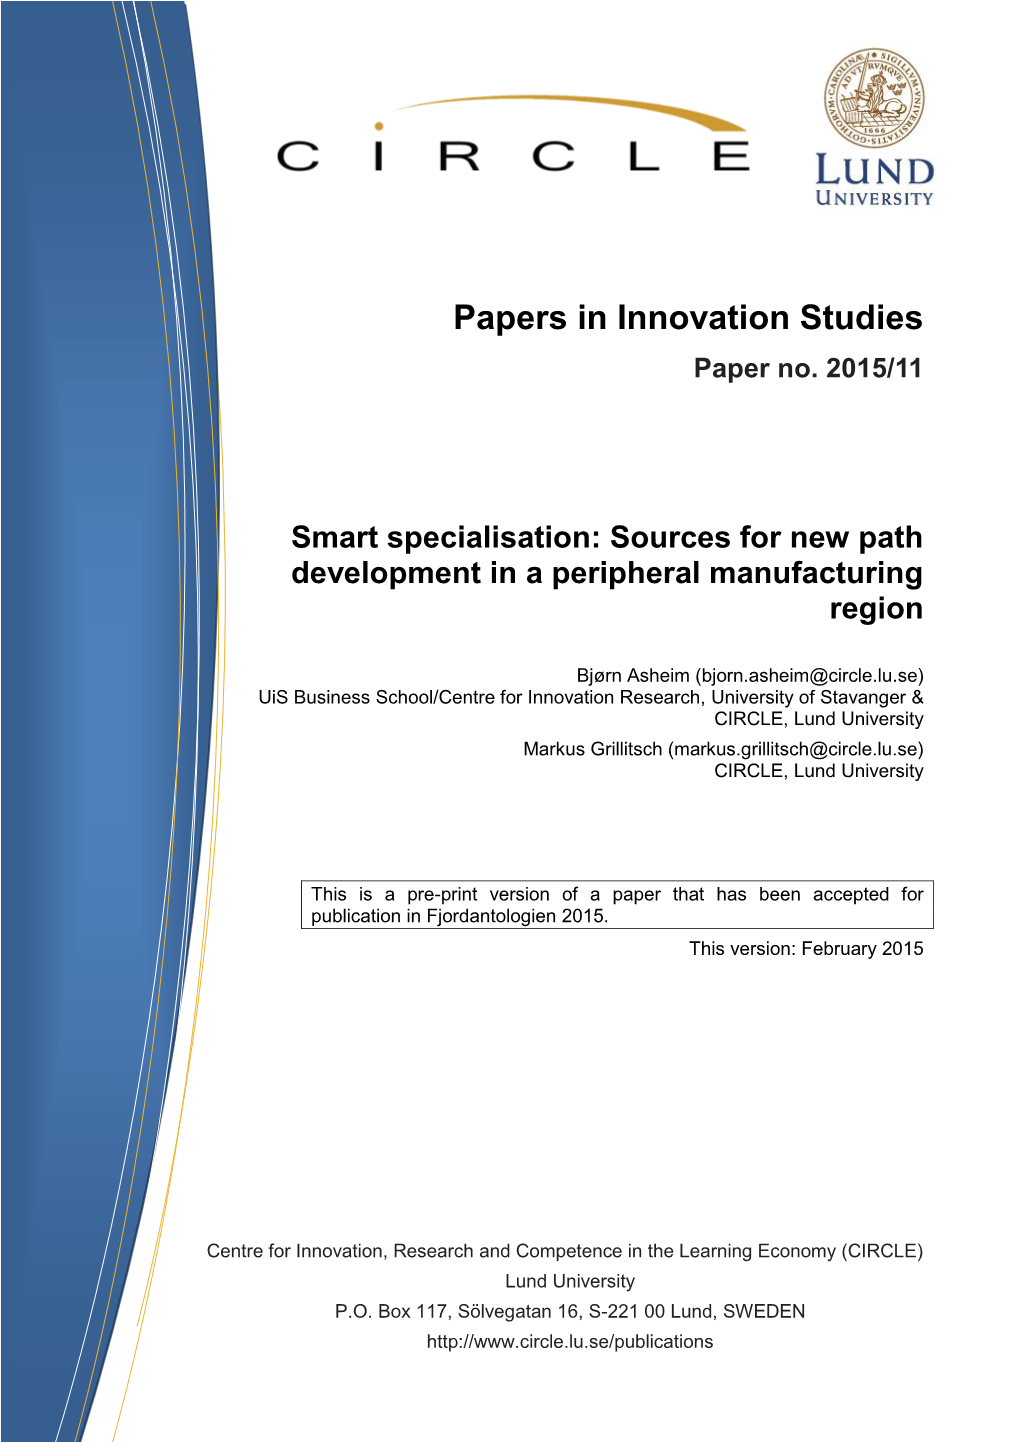 Smart Specialisation: Sources for New Path Development in a Peripheral Manufacturing Region